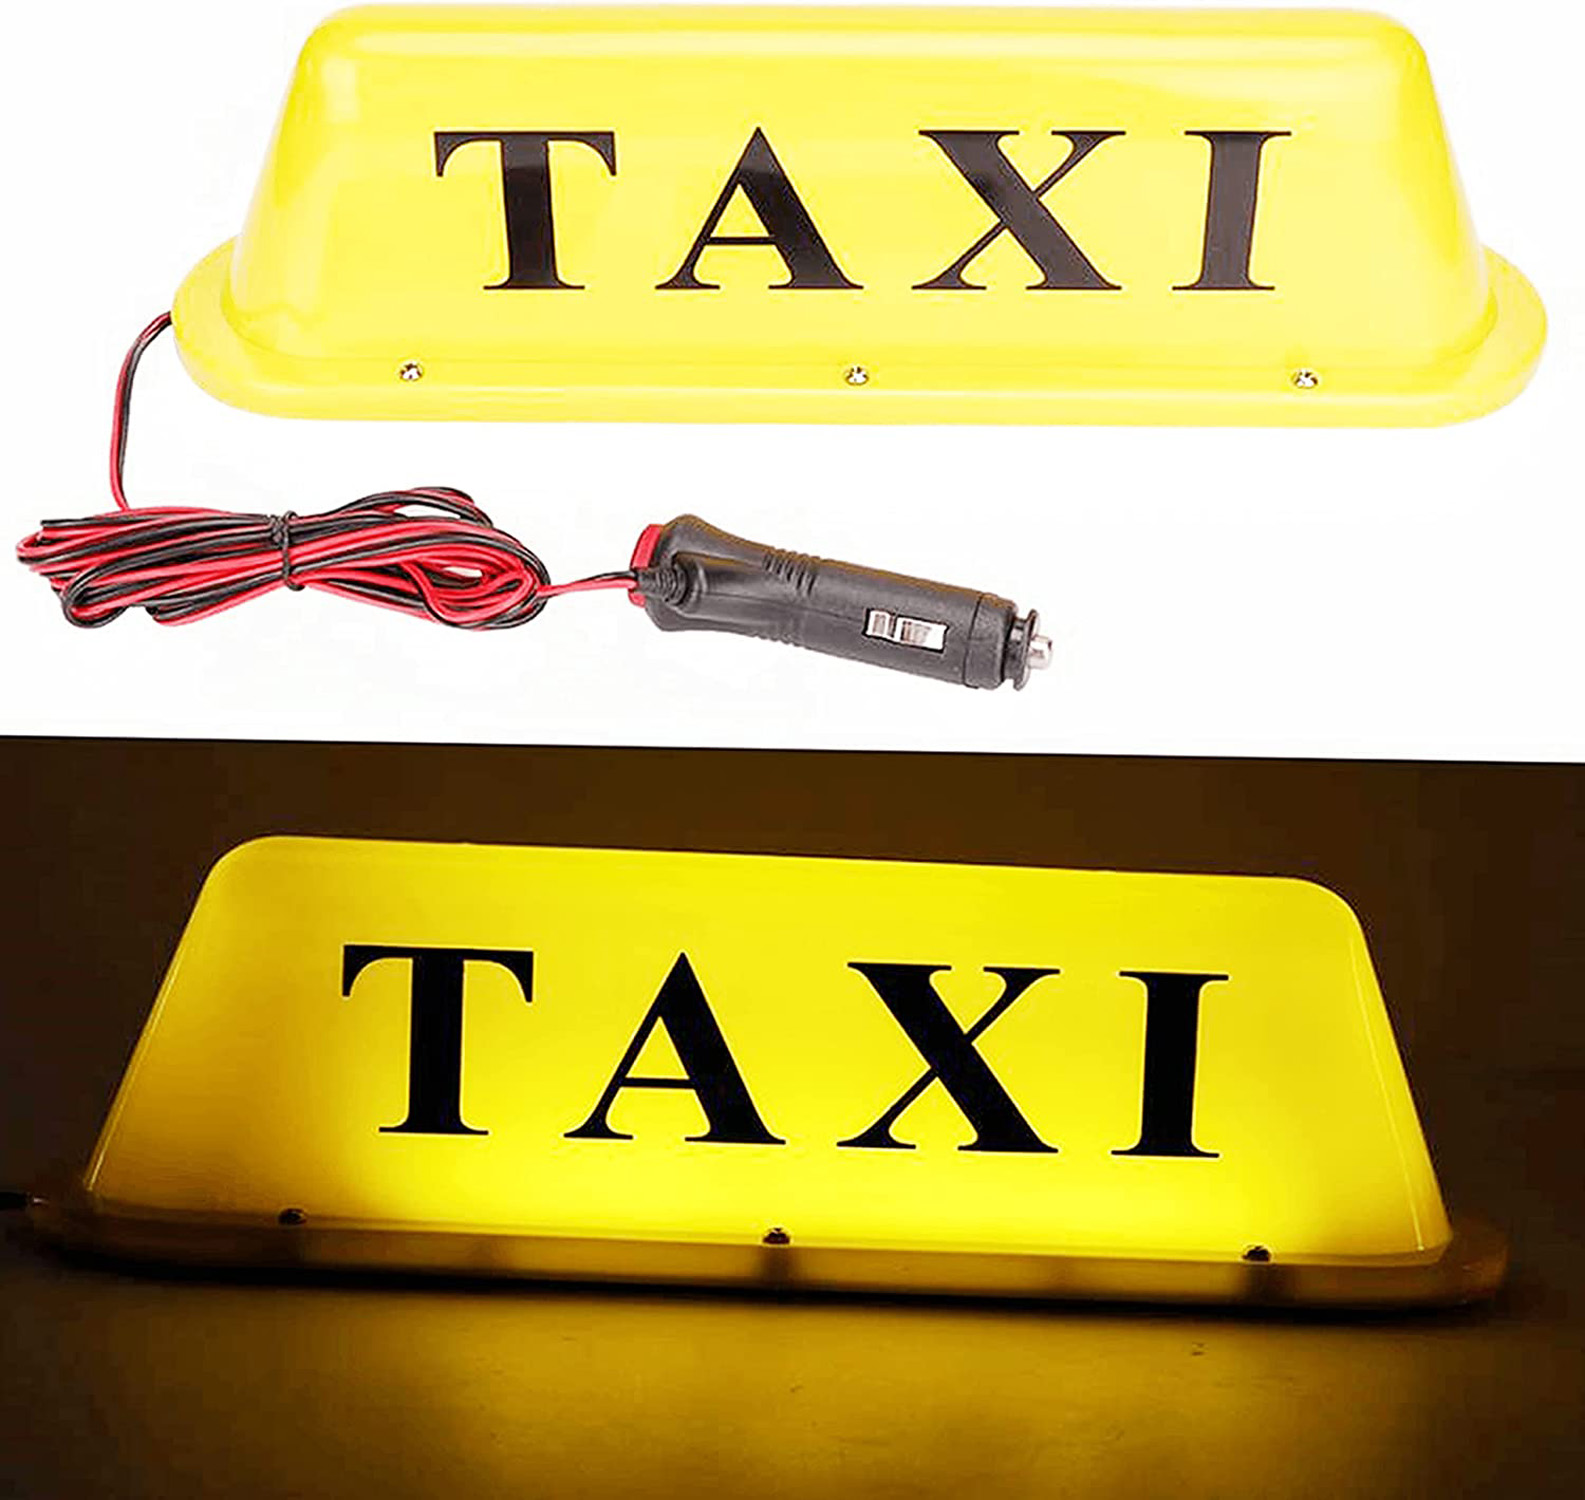 Taxi Sign Lamp, Taxi LED Light 12V LED Magnetic Taxi Sign Roof Top Car Super Bright Light Lamp with Cigar Lighter Taxi Windscreen Cab Indicator Sign